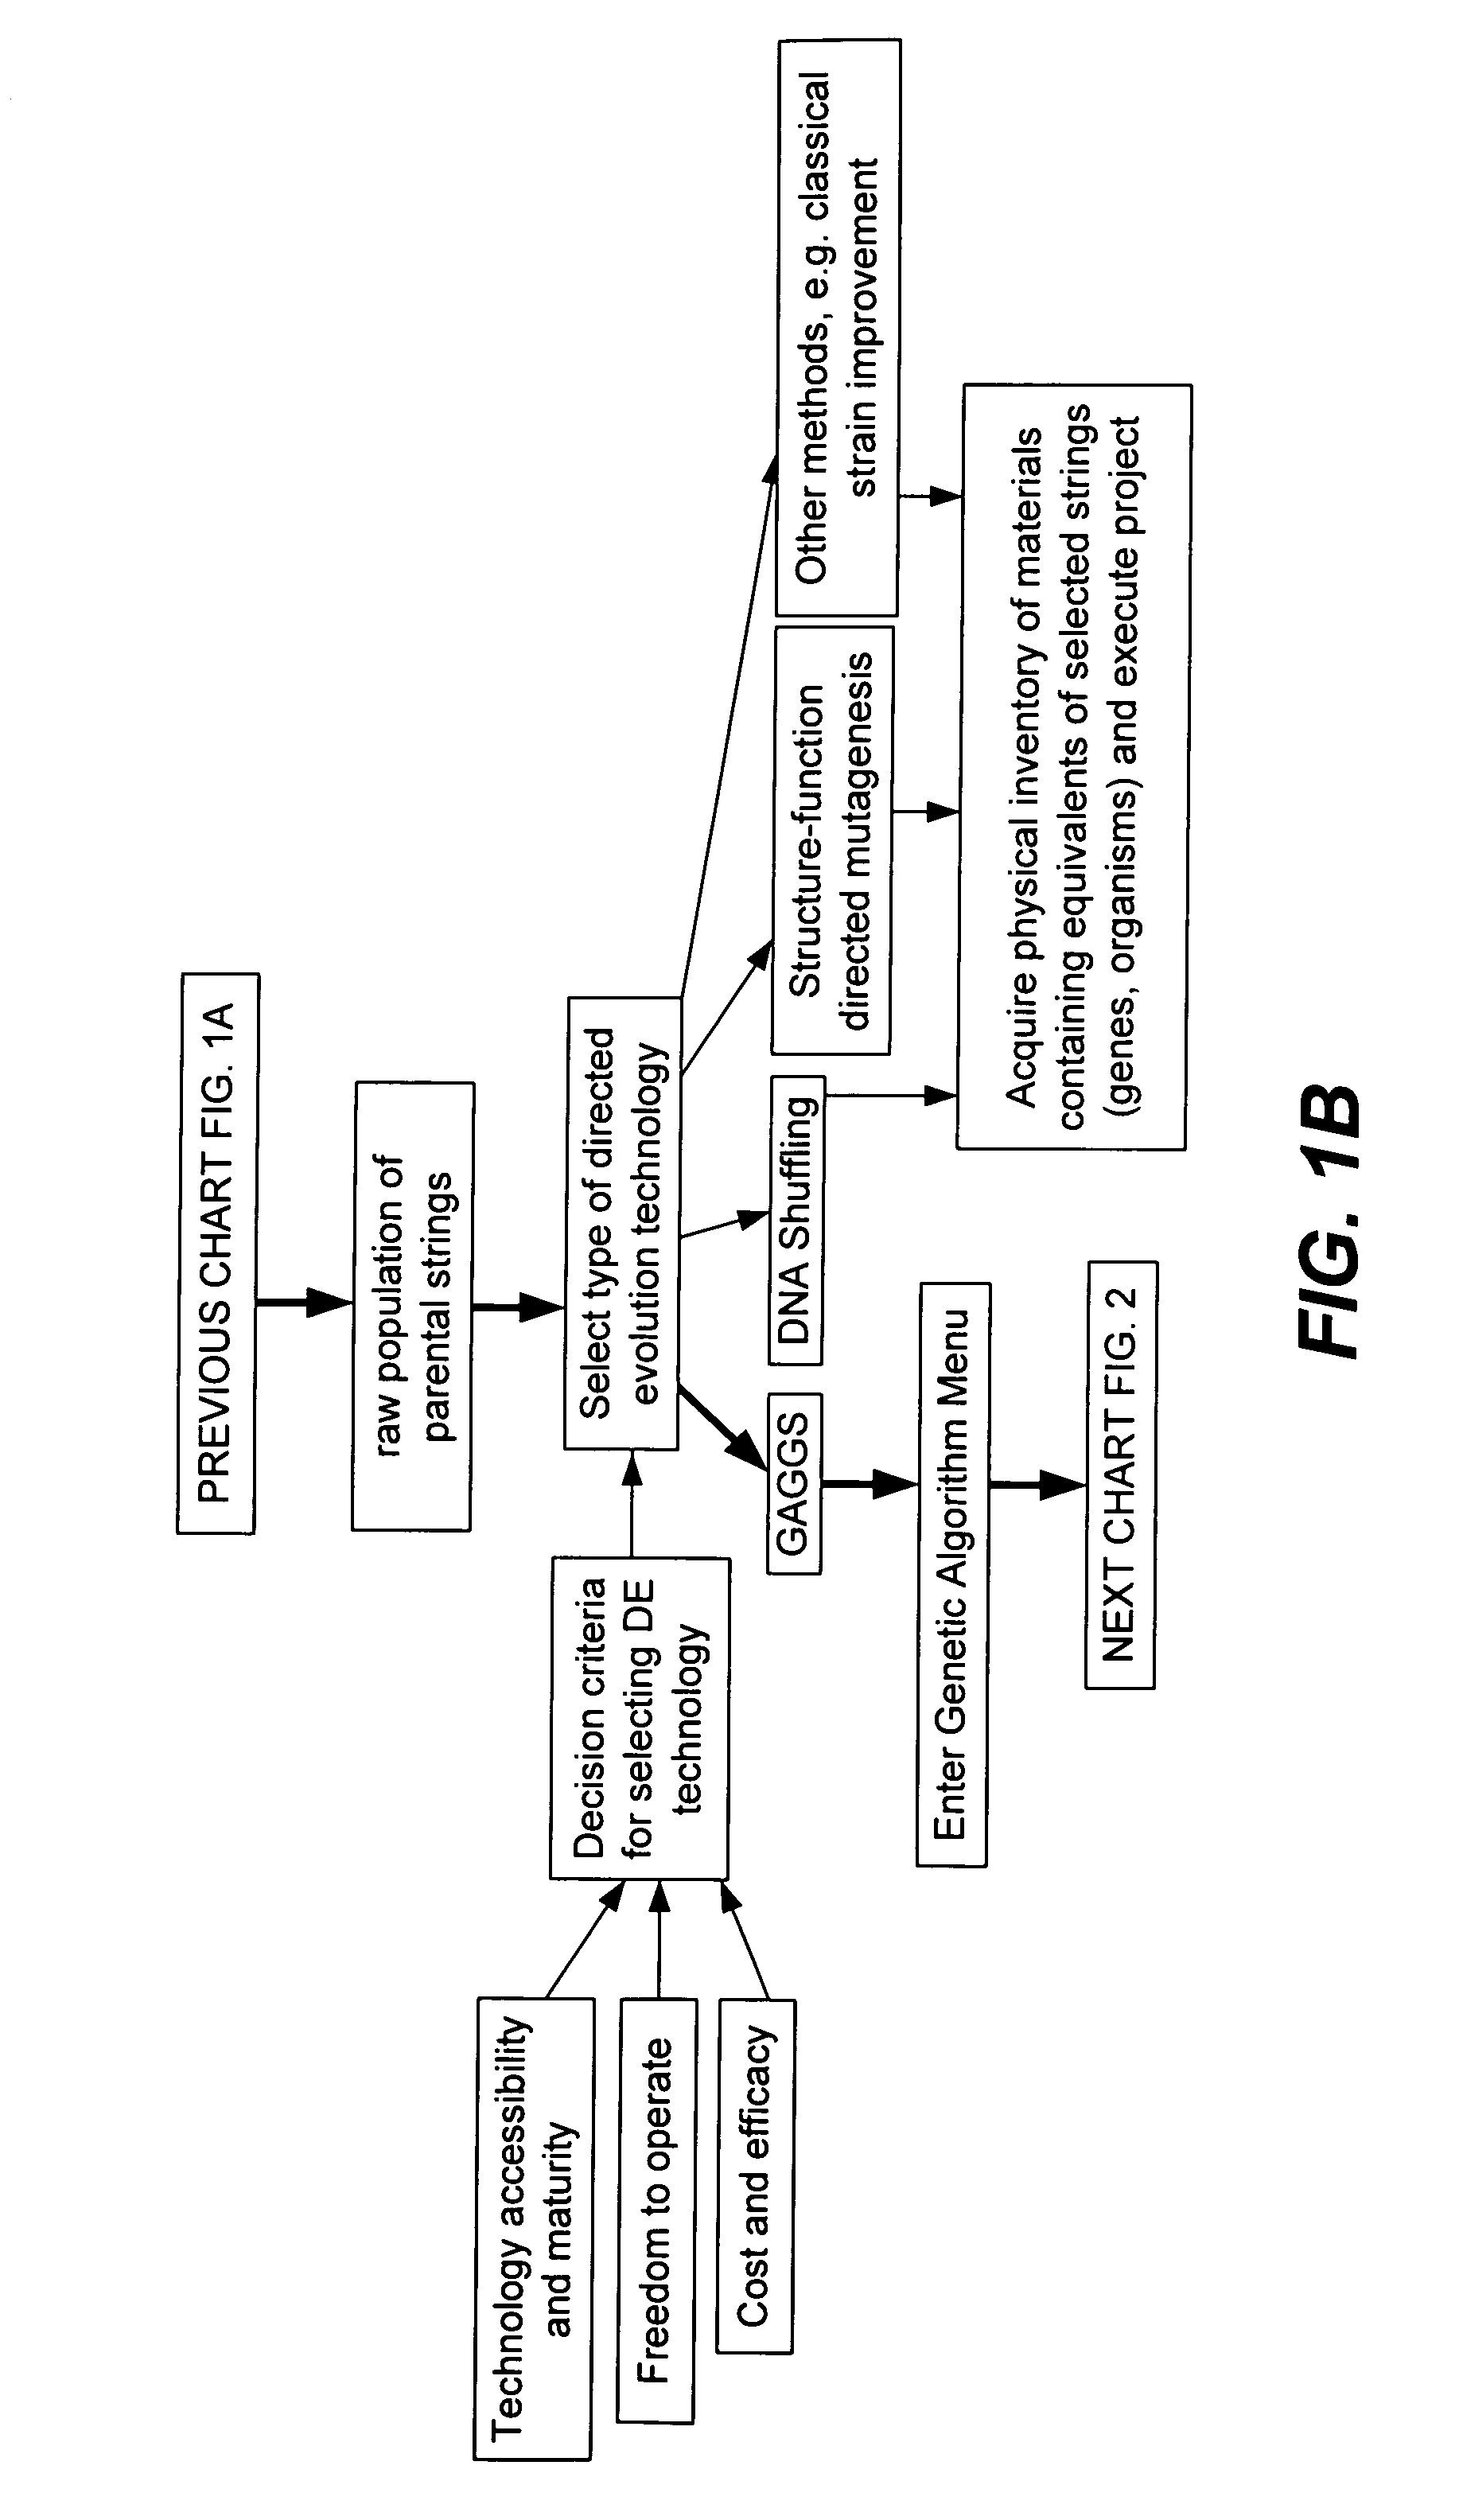 Methods for making character strings, polynucleotides and polypeptides having desired characteristics